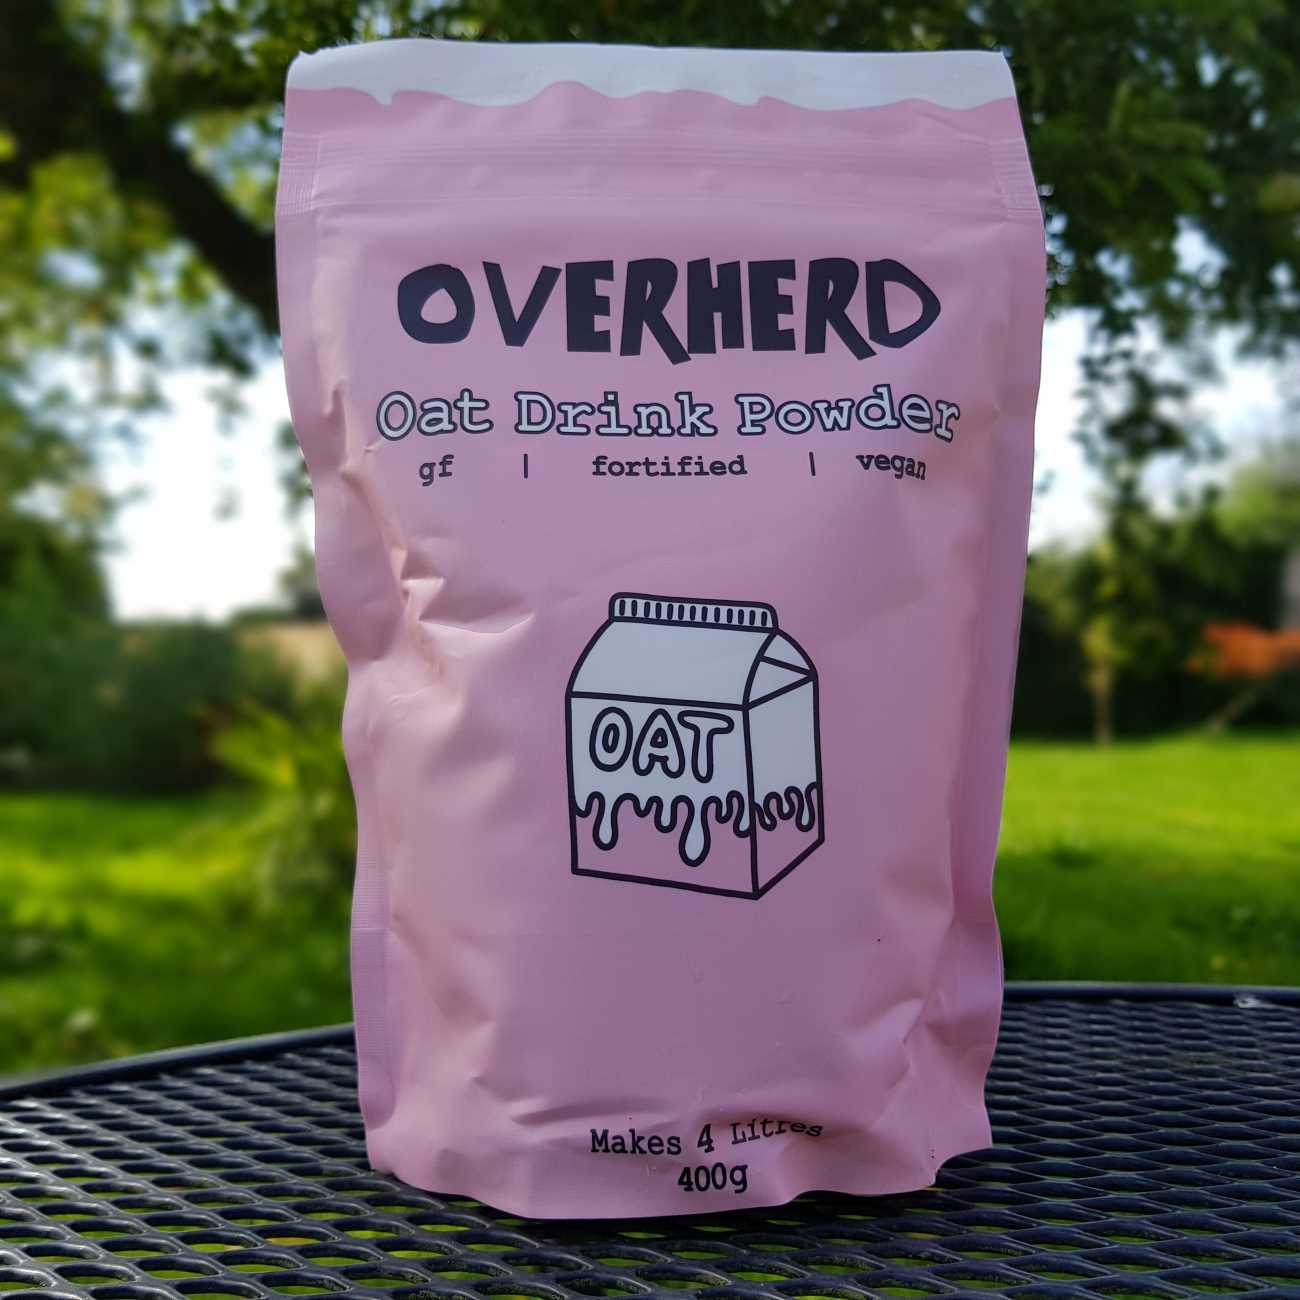 Overherd the one about powdered oat milk?